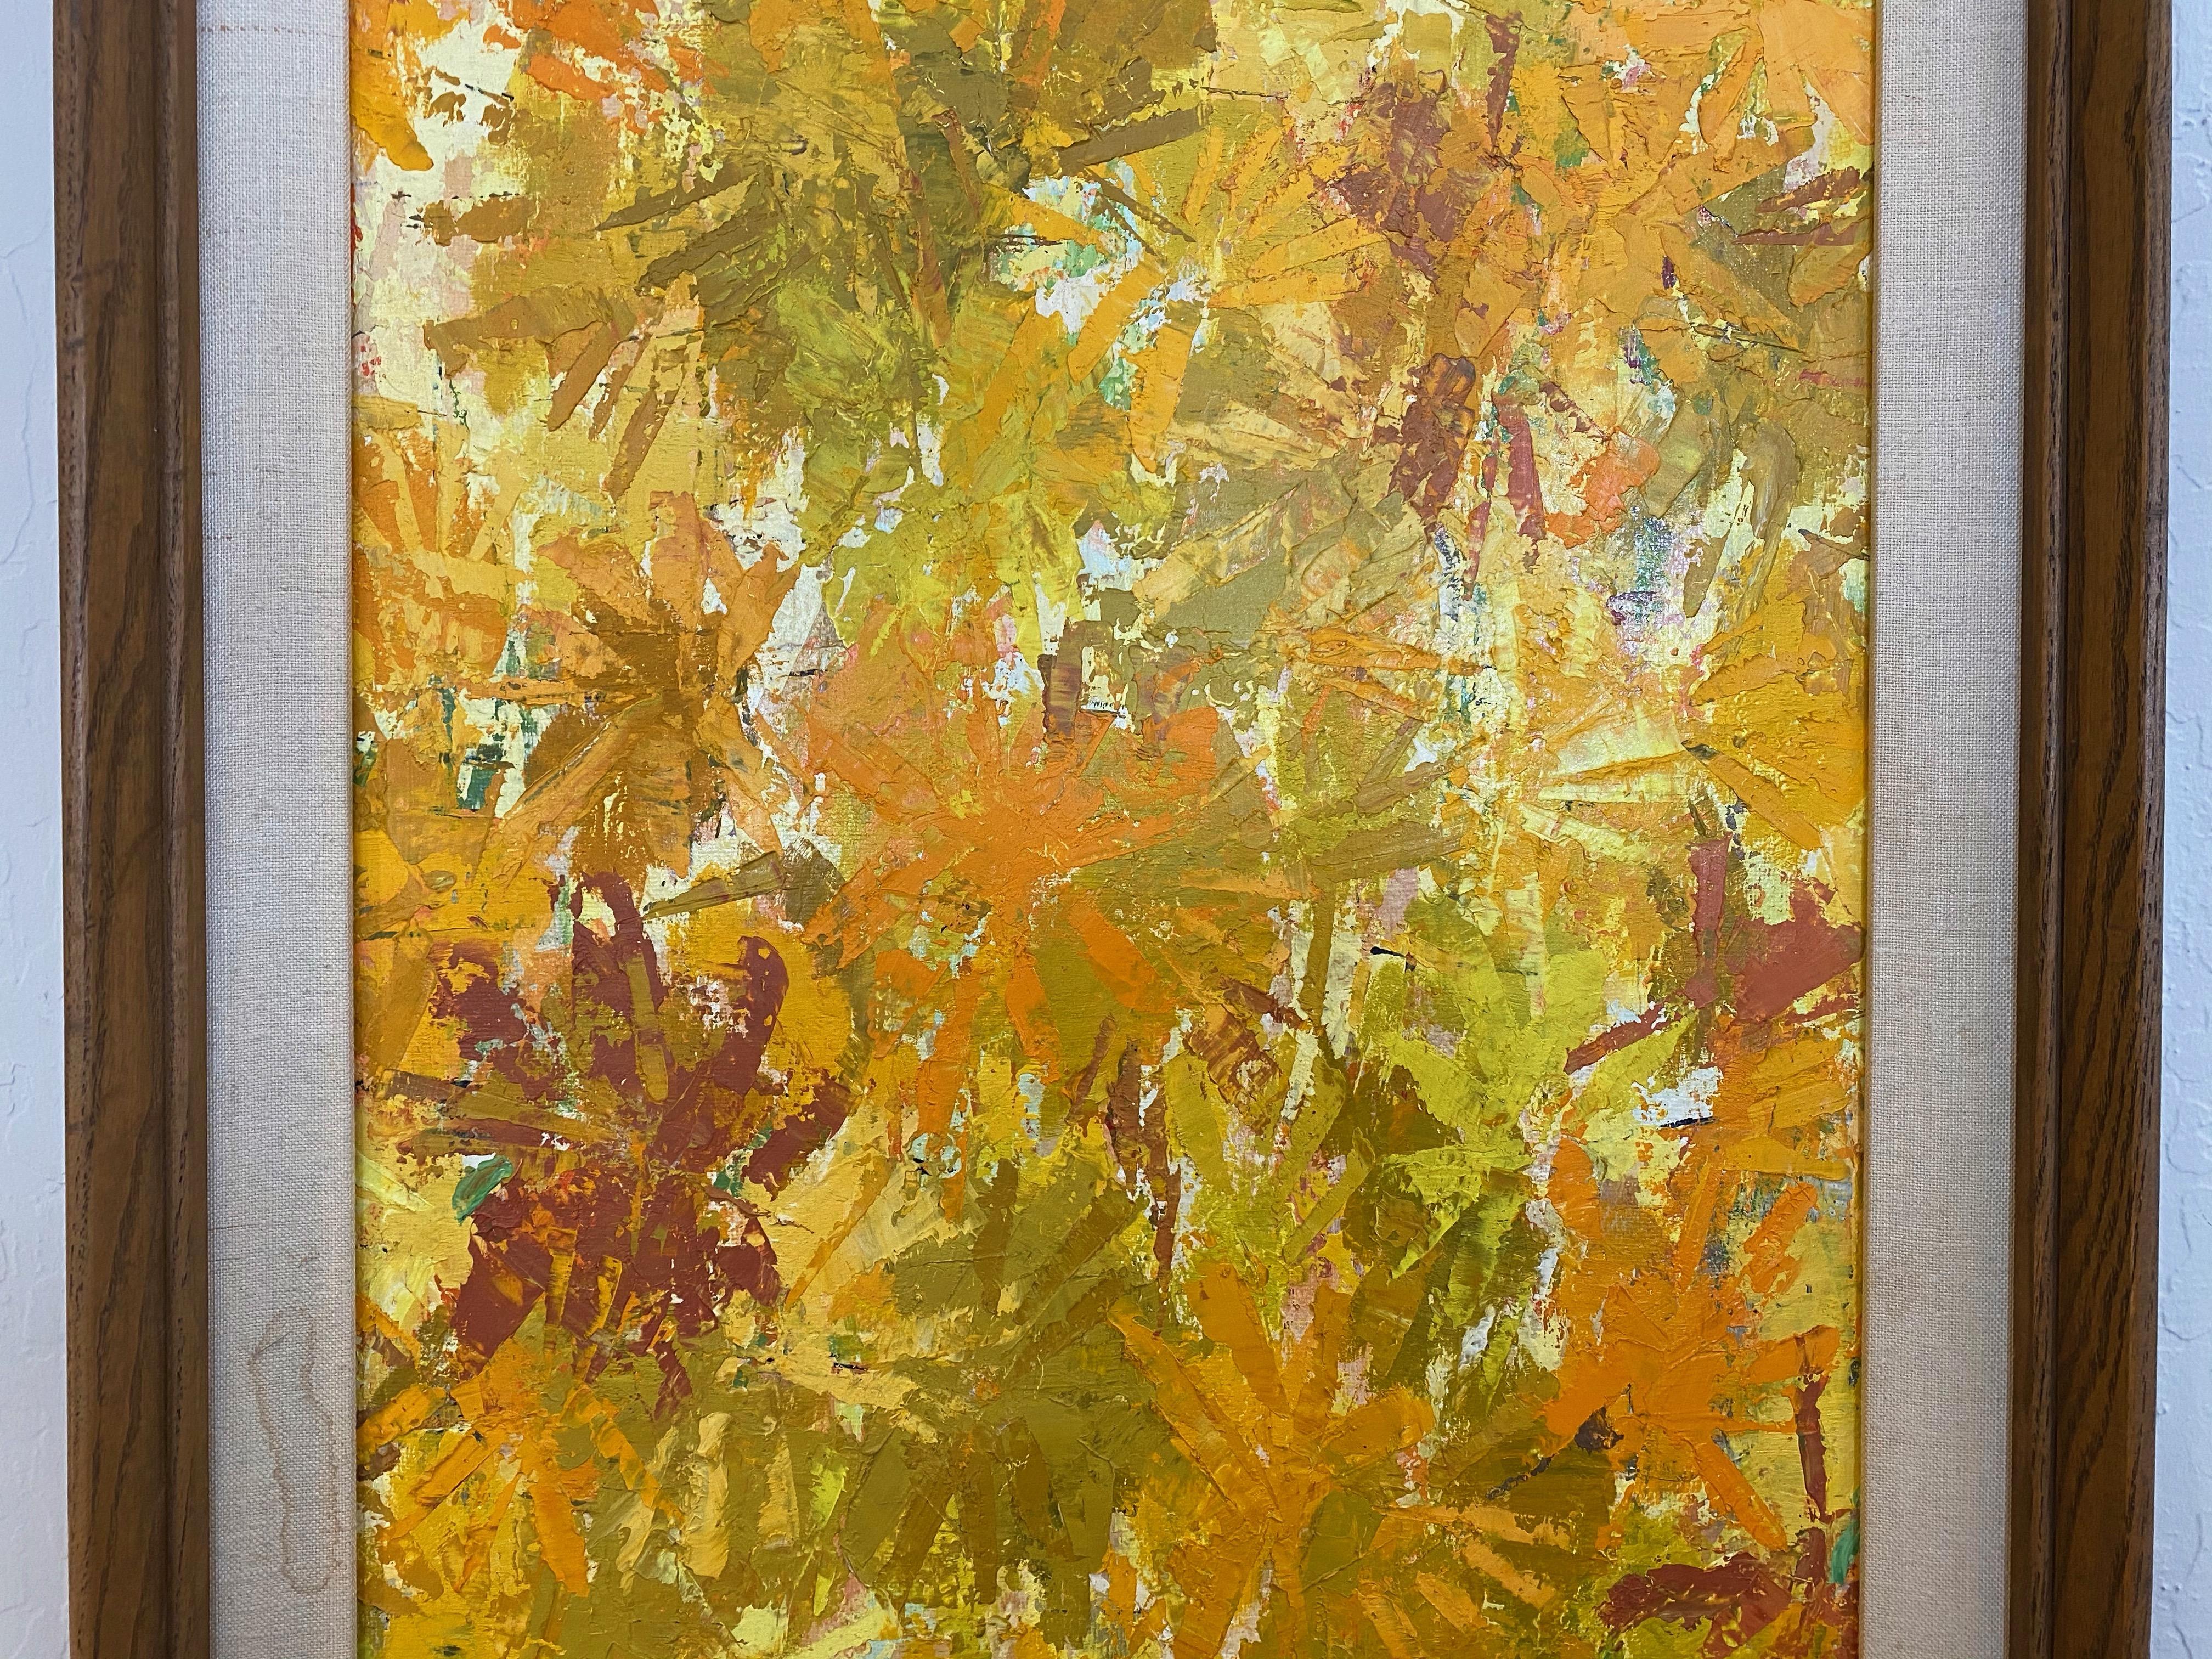 American Helena Willi “Autumn”, Expressionist Flora Oil Painting, c. 1960